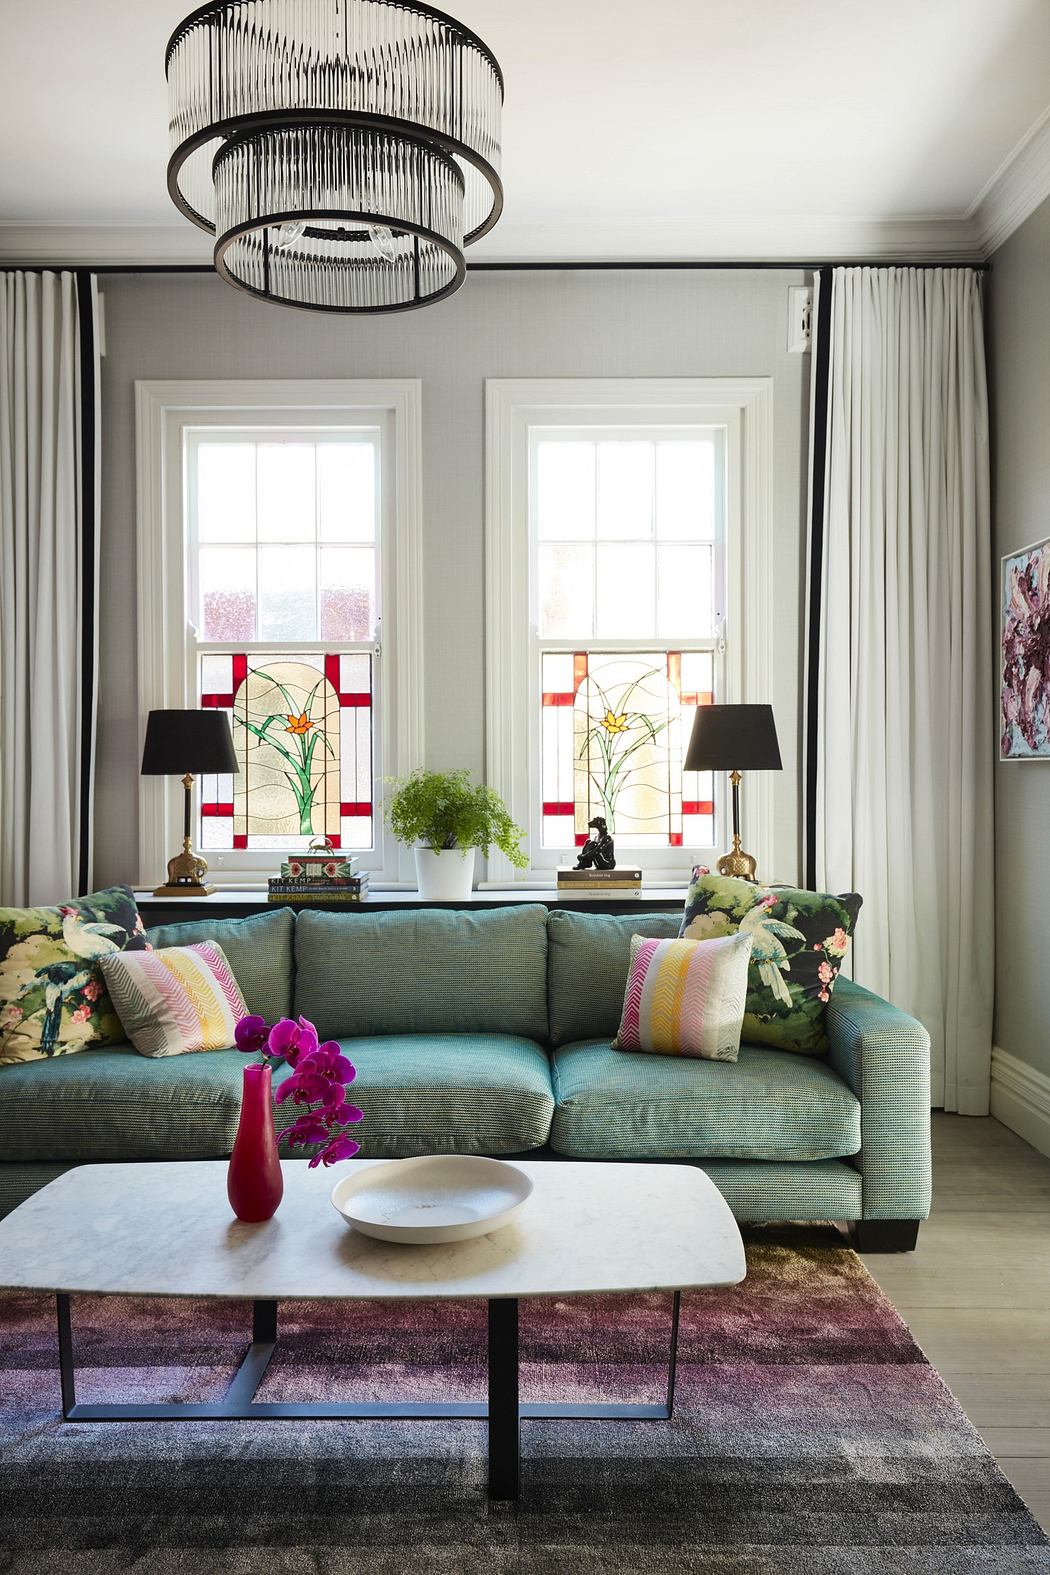 Elegant living room with a turquoise sofa, modern chandelier, and vibrant accents